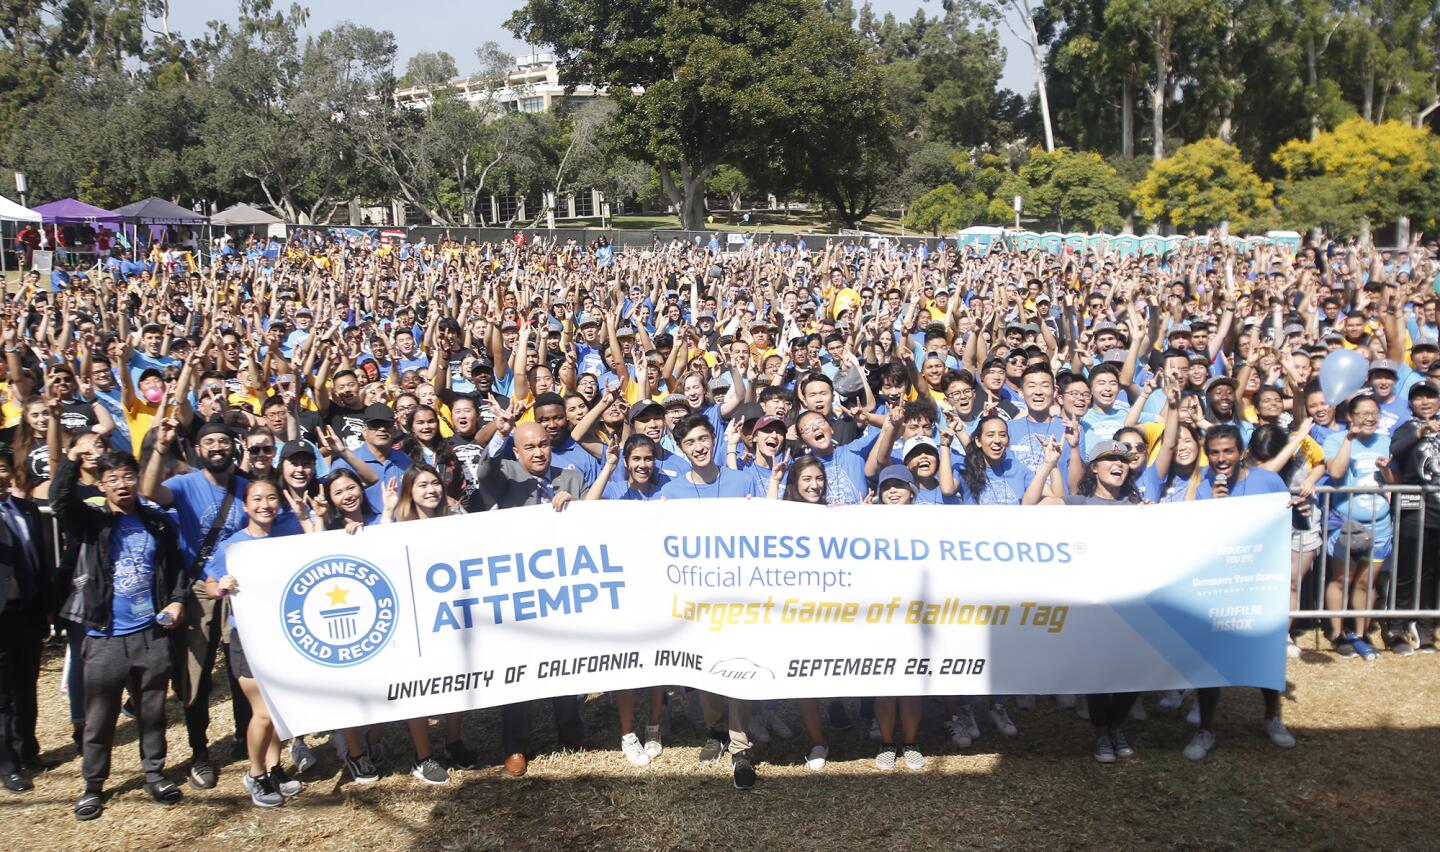 tn-uci-attempts-guiness-book-of-world-record-b-004